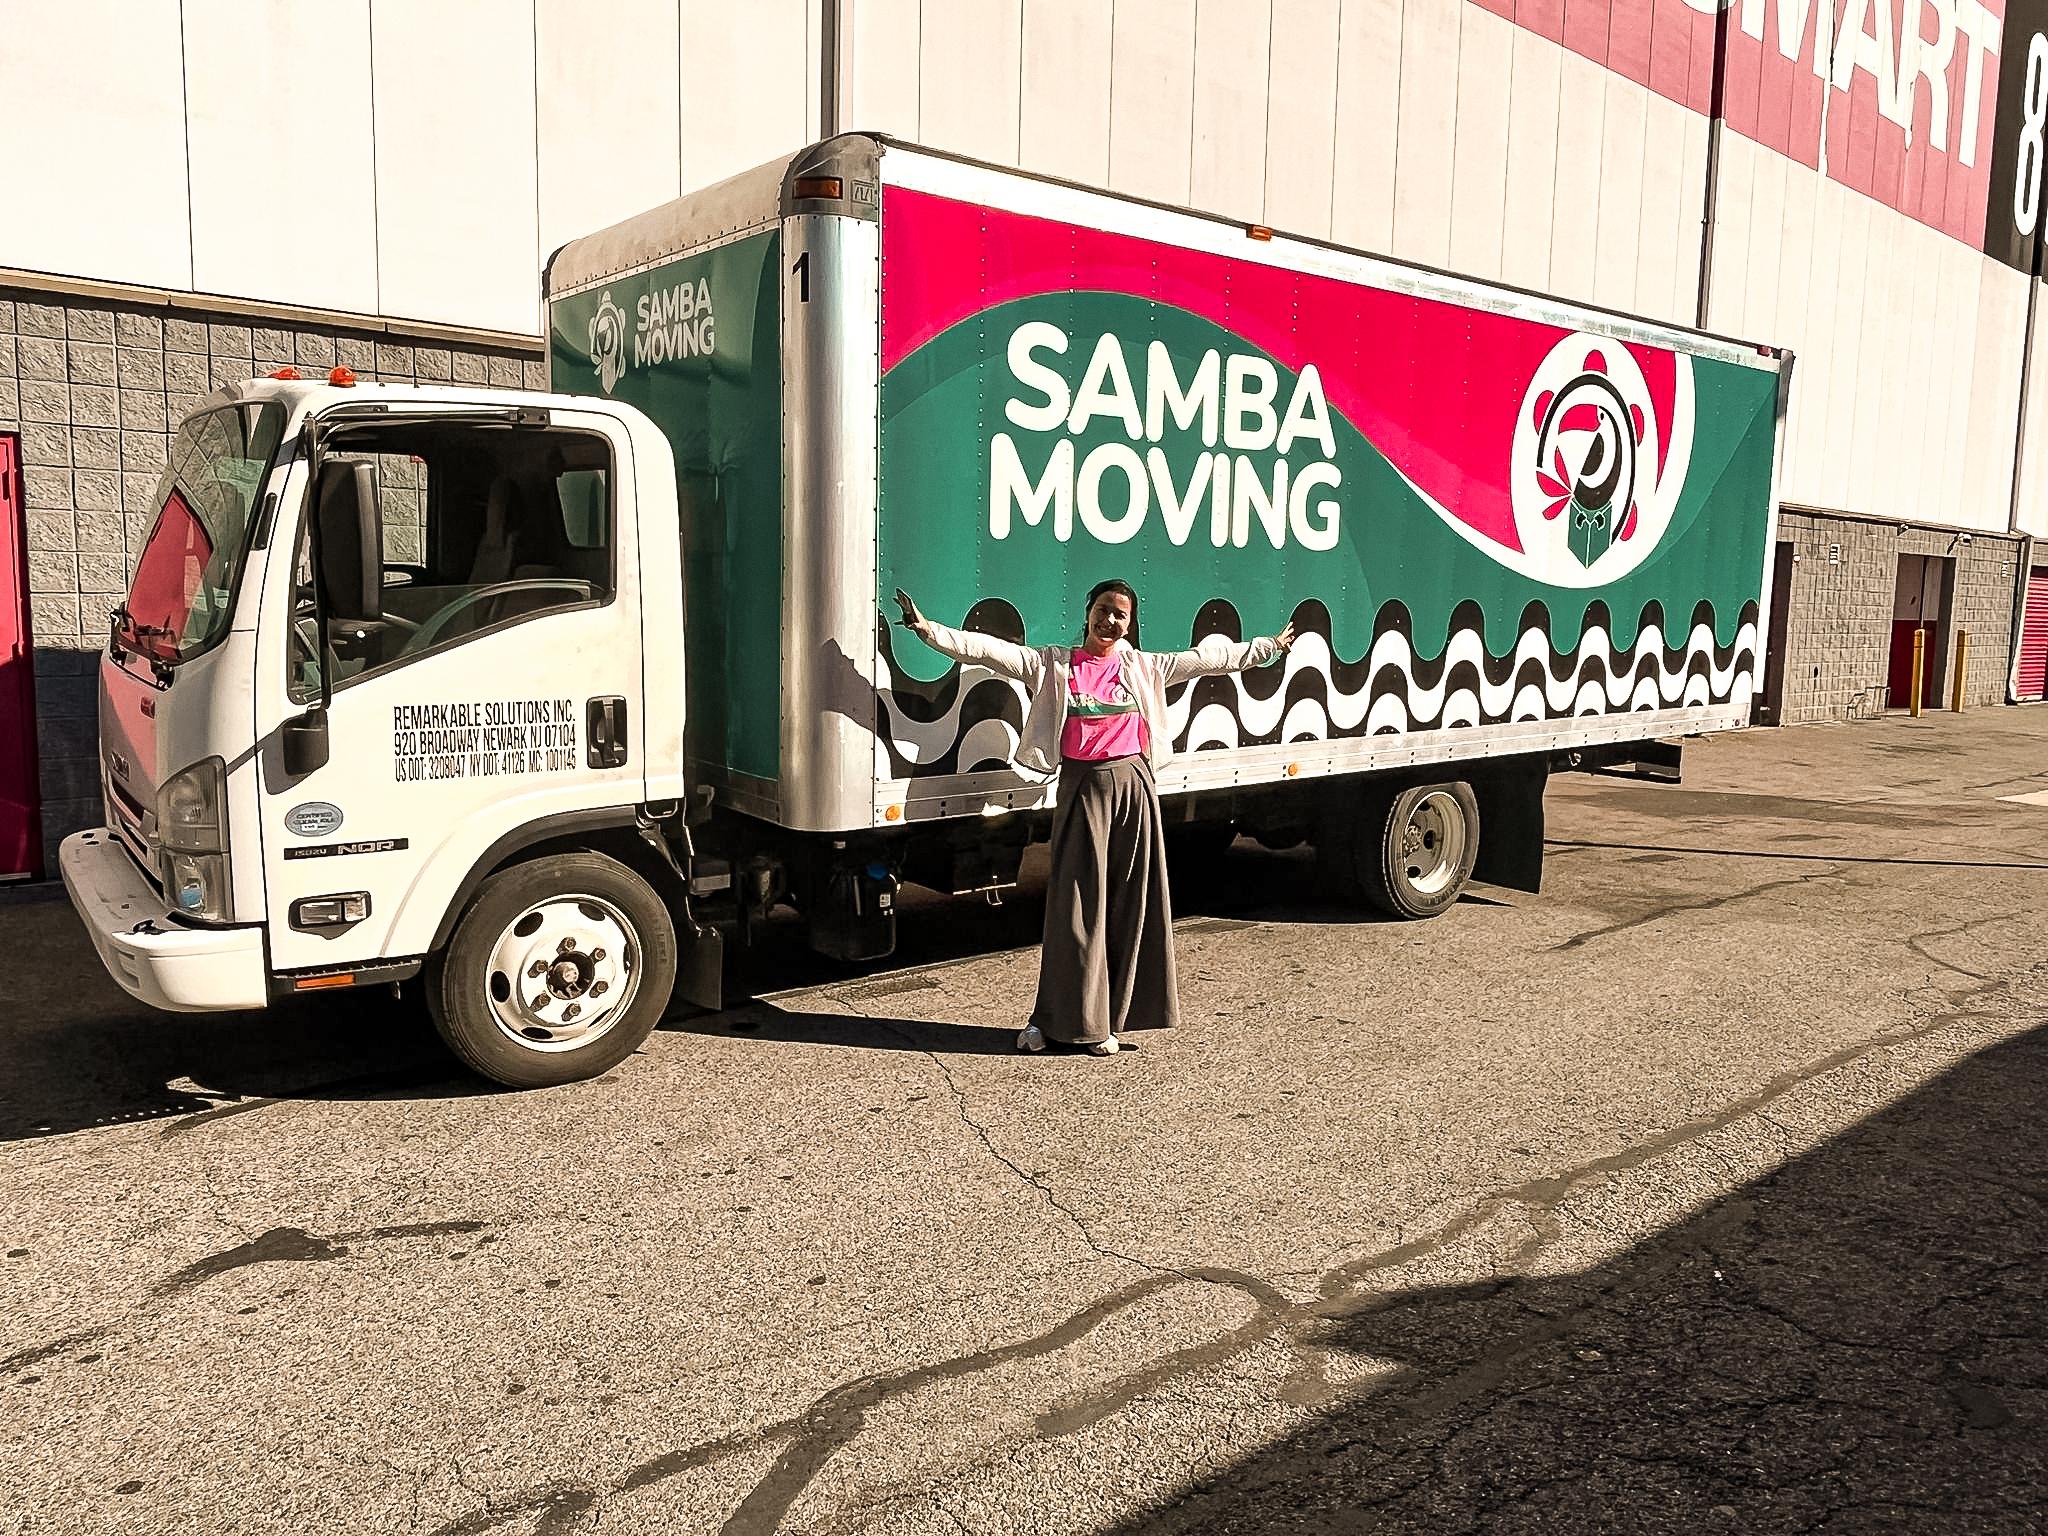 Samba moving truck with woman in front of it.